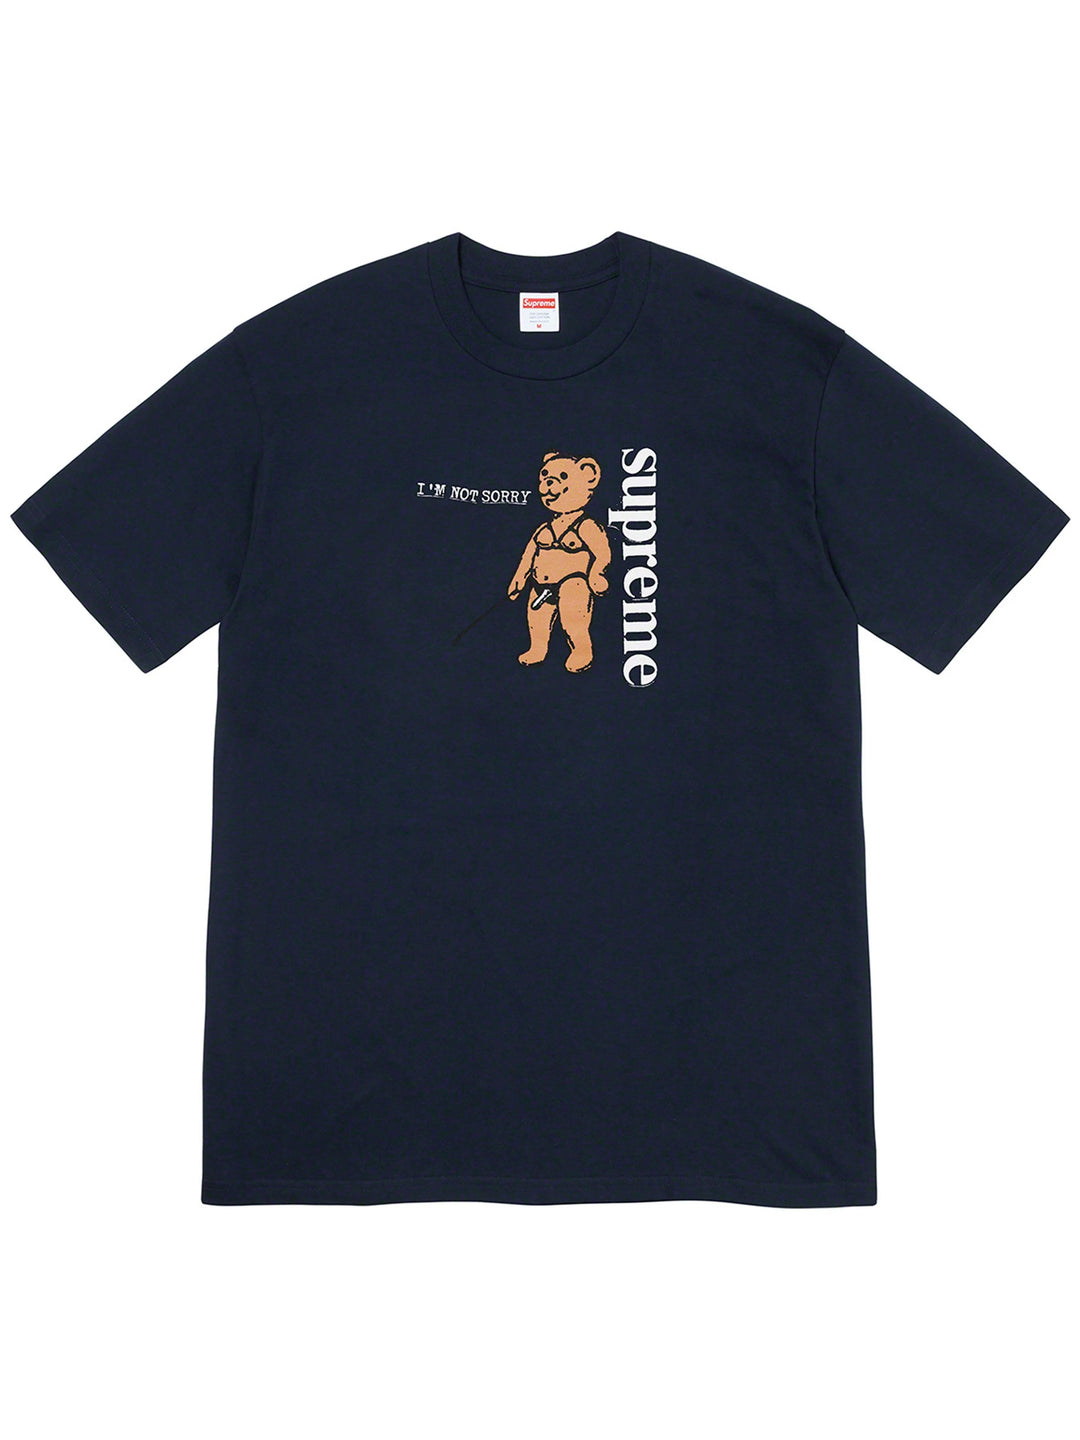 Supreme Not Sorry Tee Navy [SS21] Prior